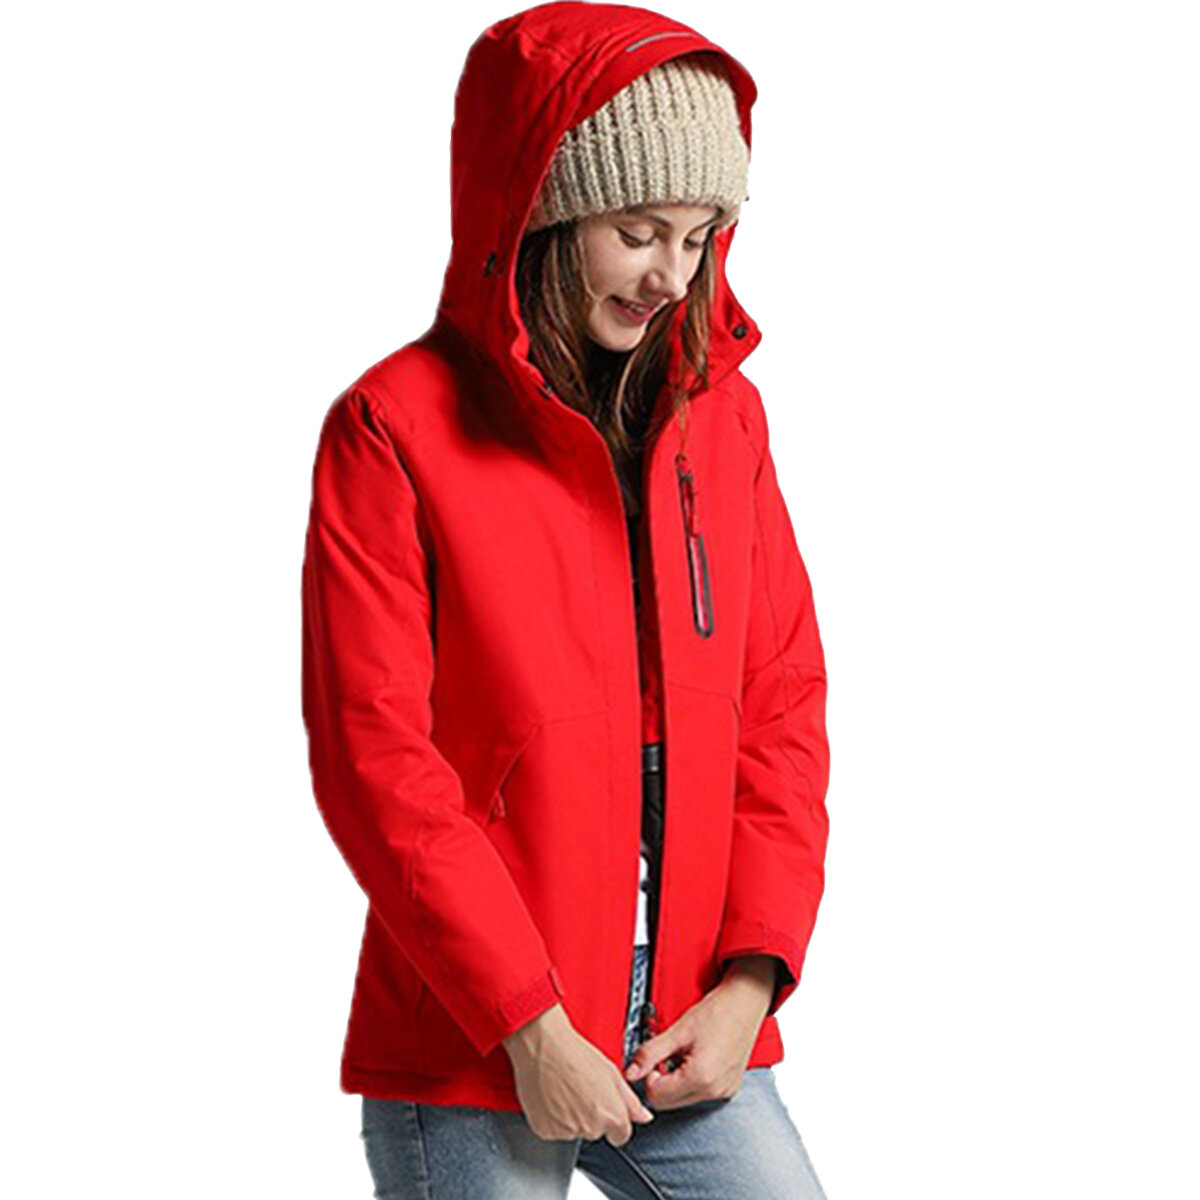 Women Winter Waterproof USB Infrared Heating Hooded Down Jacket Electric Thermal Clothing Coat For Sports Climbing Hiking